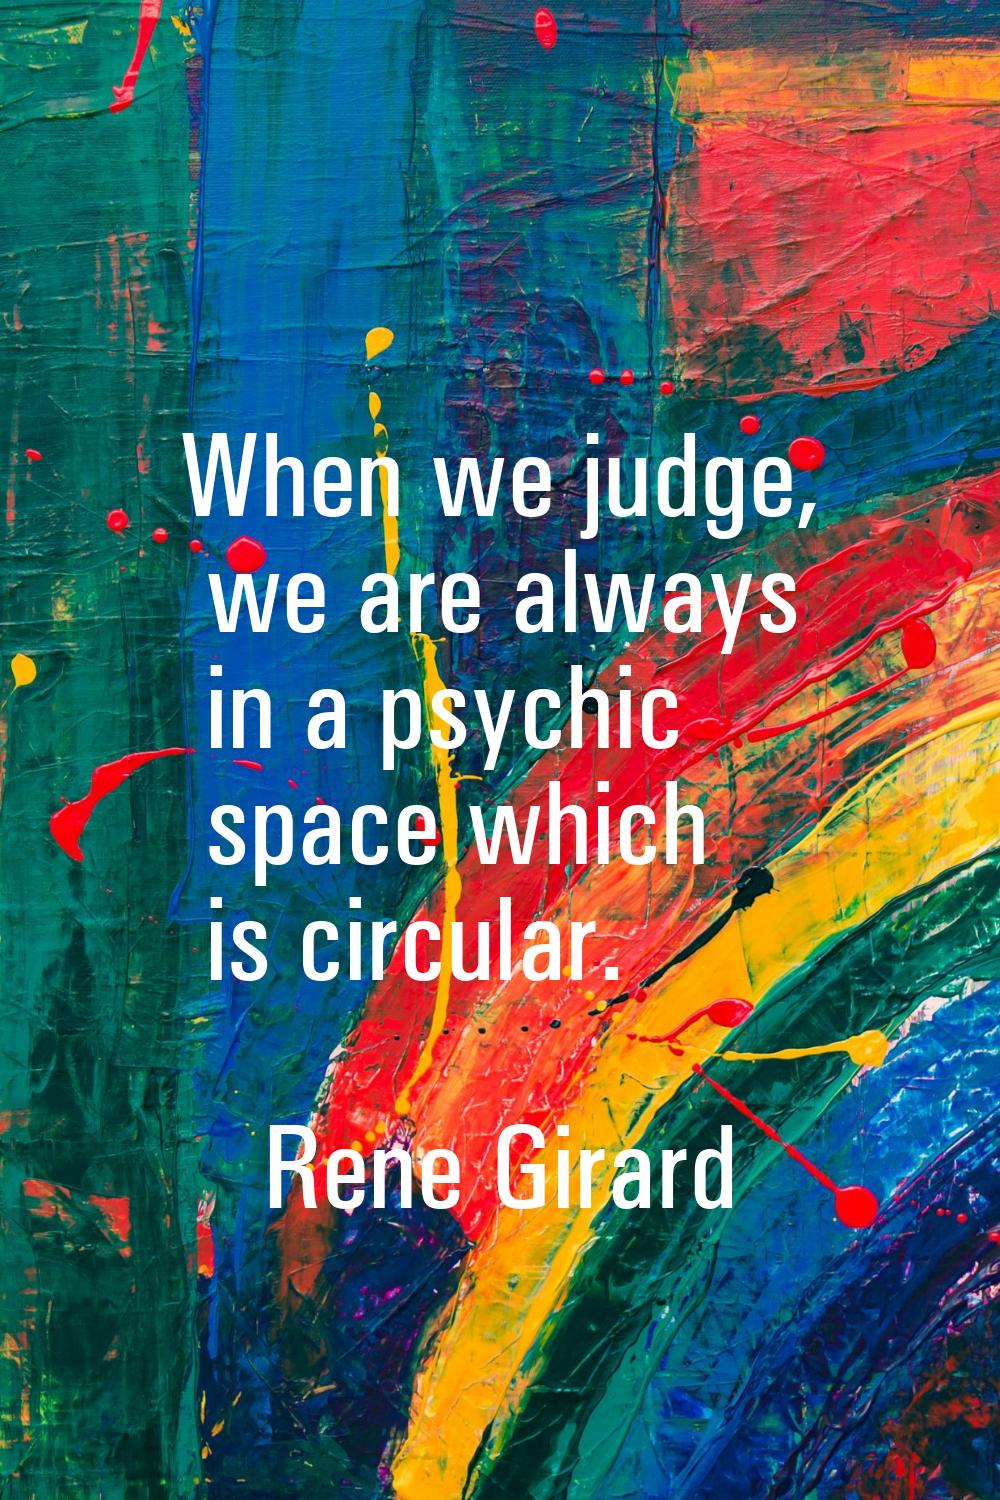 When we judge, we are always in a psychic space which is circular.